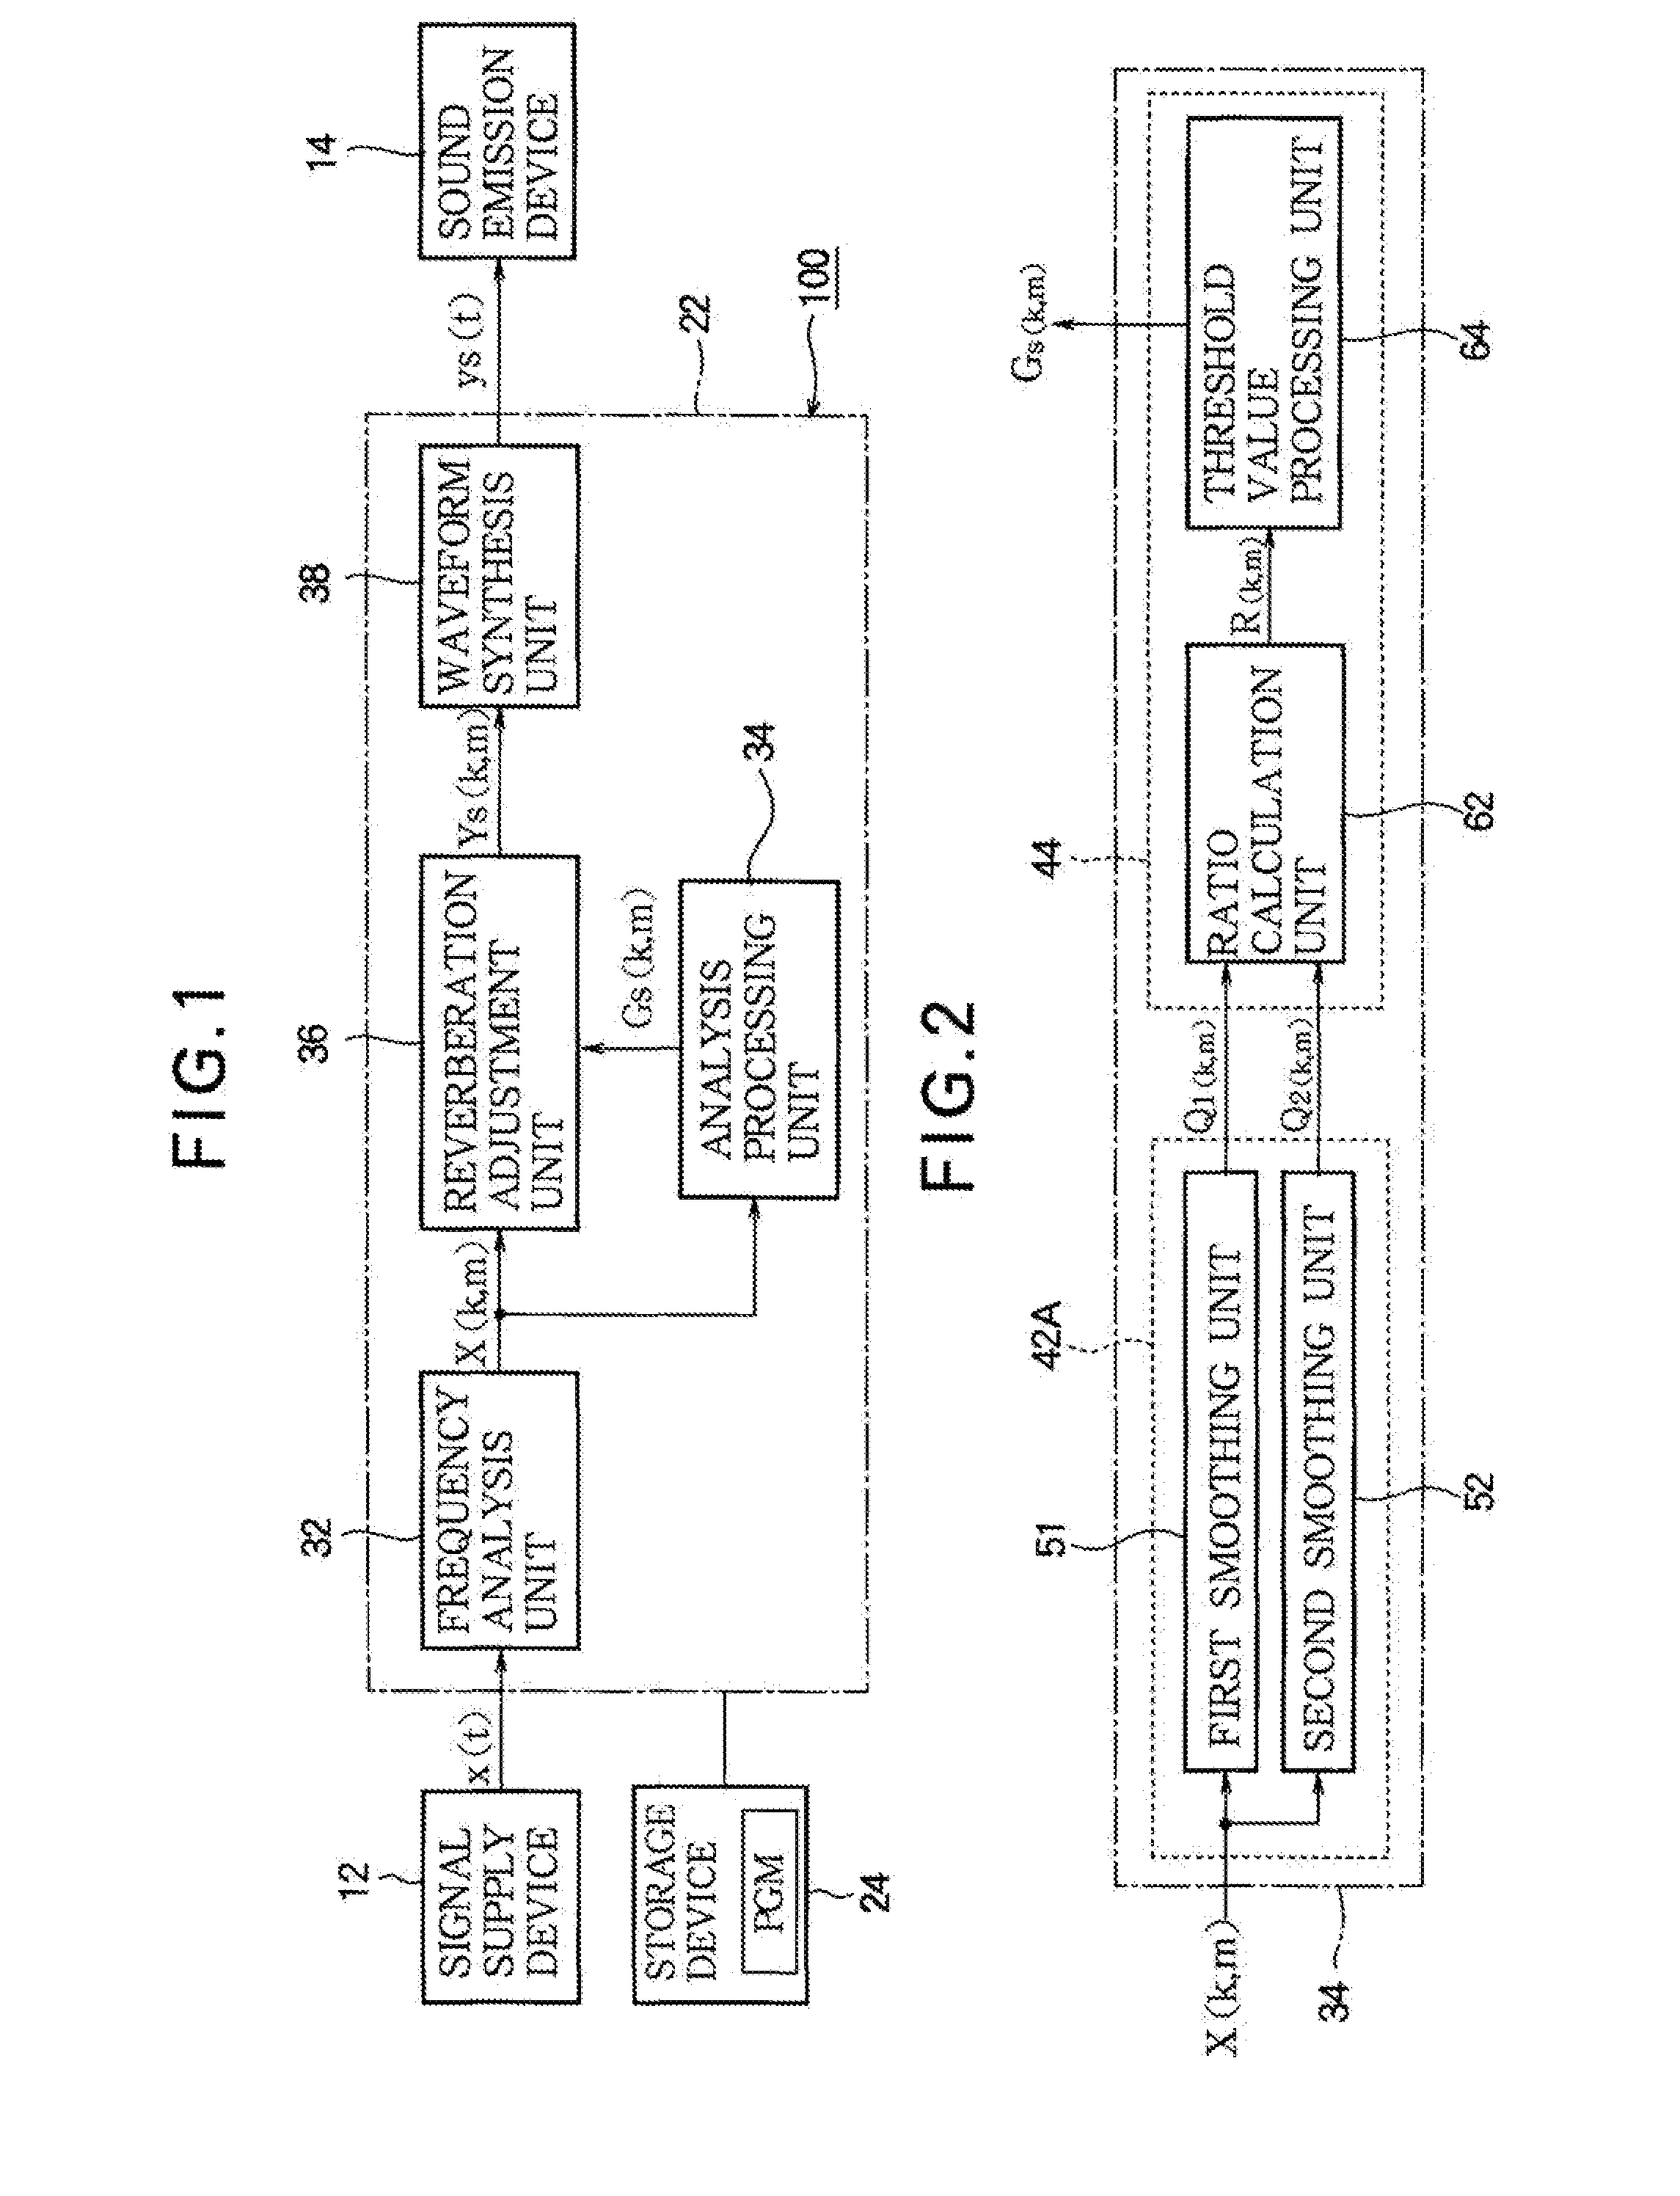 Sound processing device